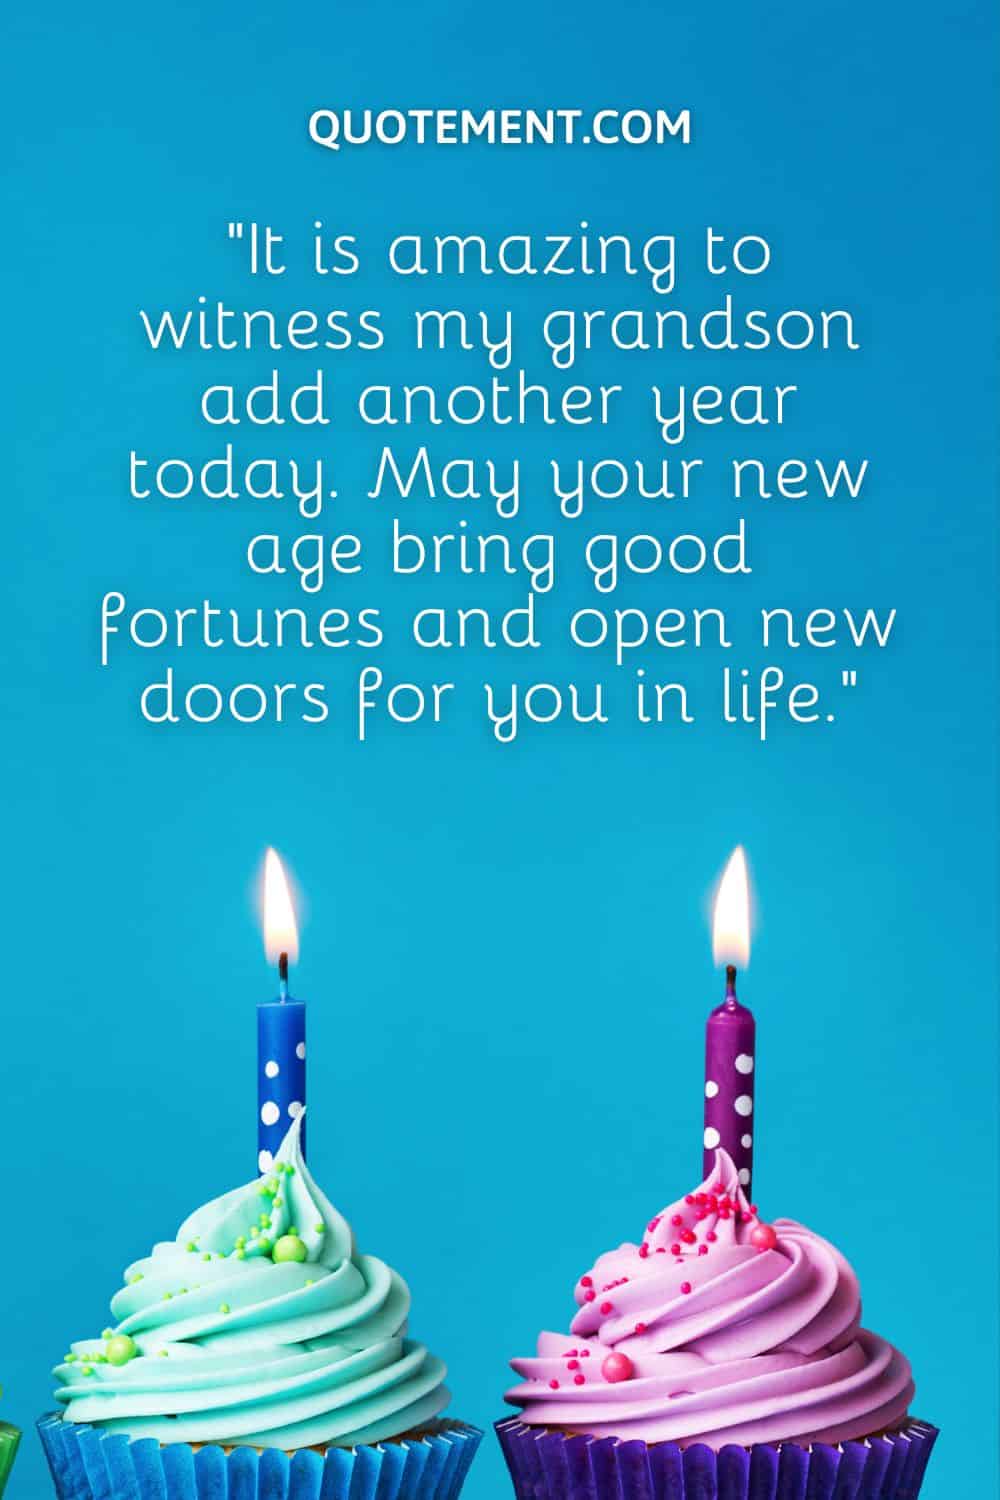 “It is amazing to witness my grandson add another year today. May your new age bring good fortunes and open new doors for you in life.”